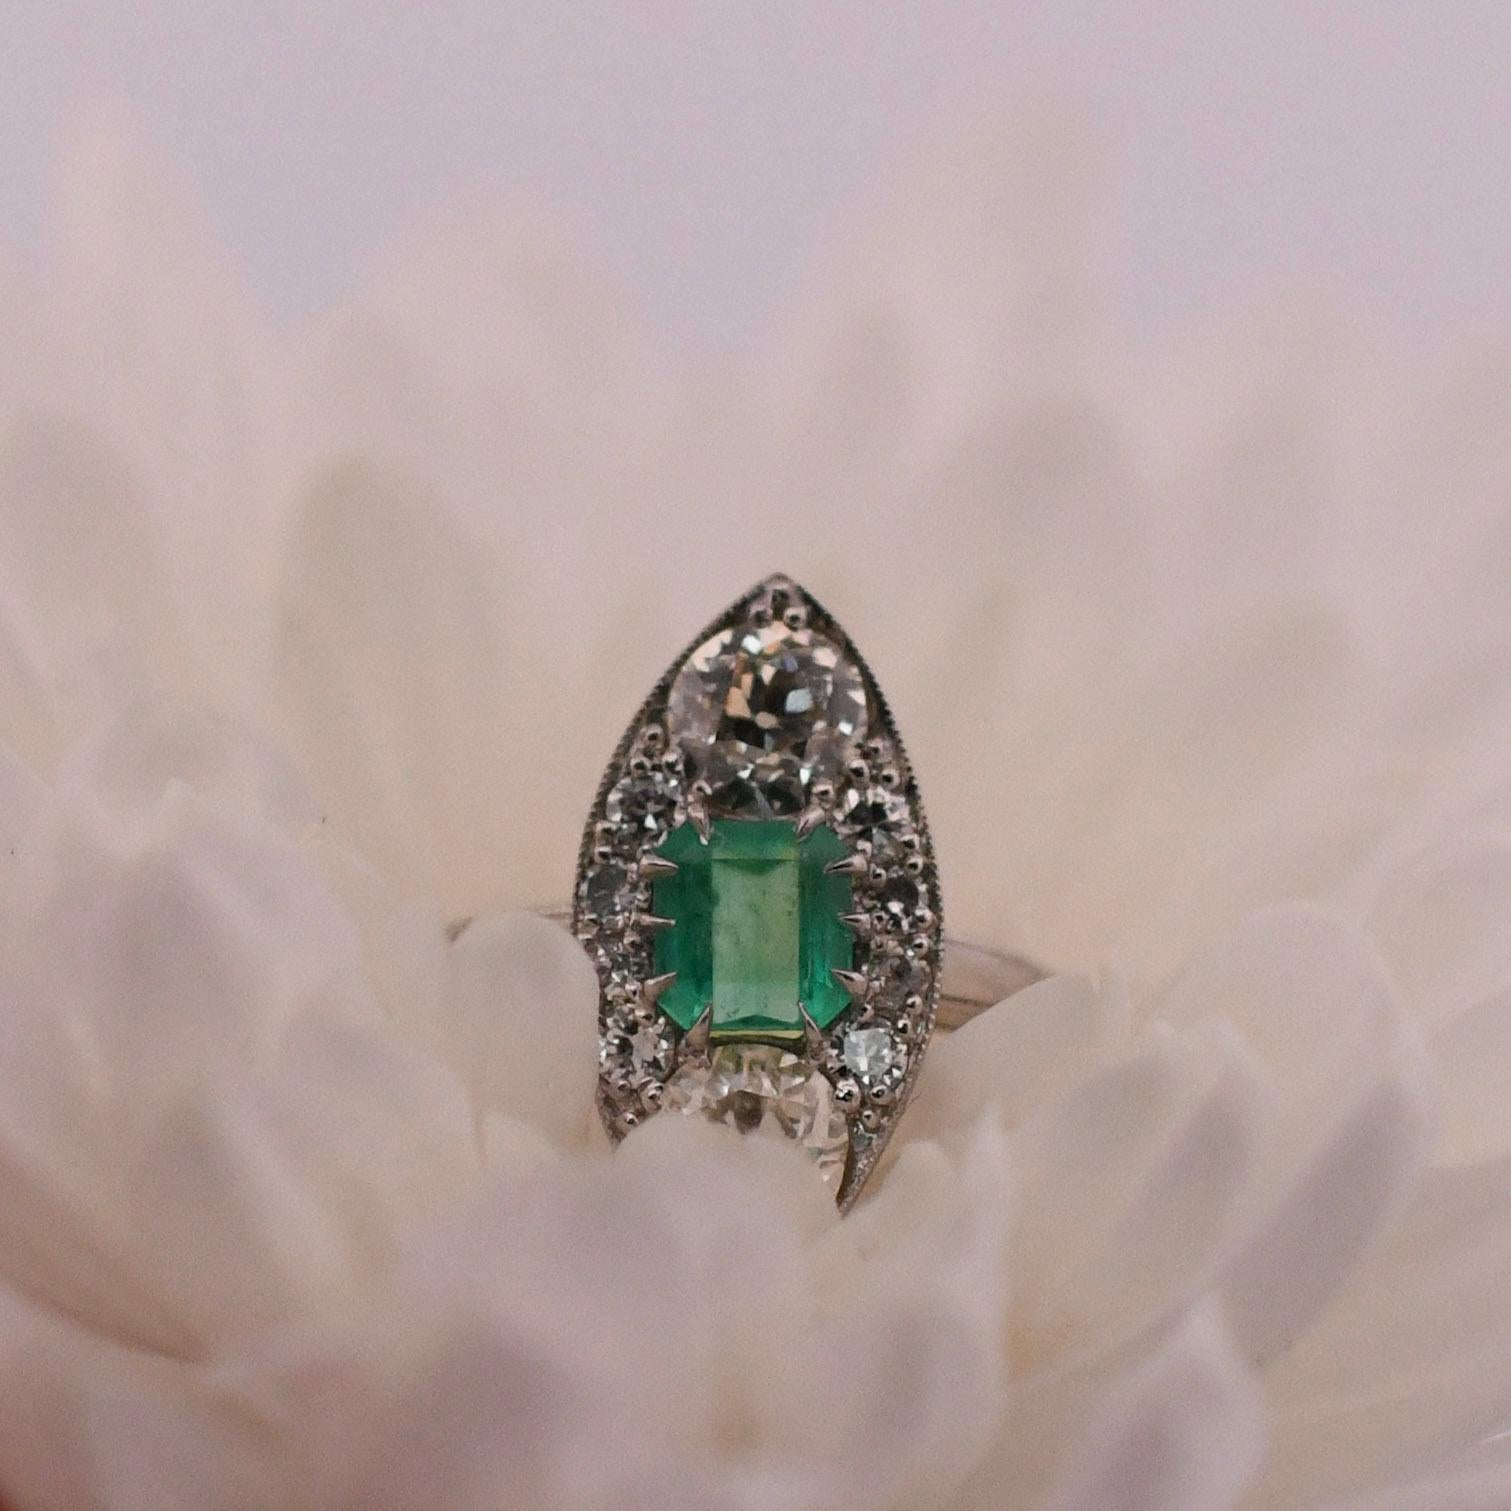 Transport yourself to the glamorous Art Deco era with this exquisite 3-stone Navette Ring, showcasing two sparkling diamonds flanking a captivating center Colombian Emerald. The ring's design epitomizes the Art Deco movement's sleek lines, geometric